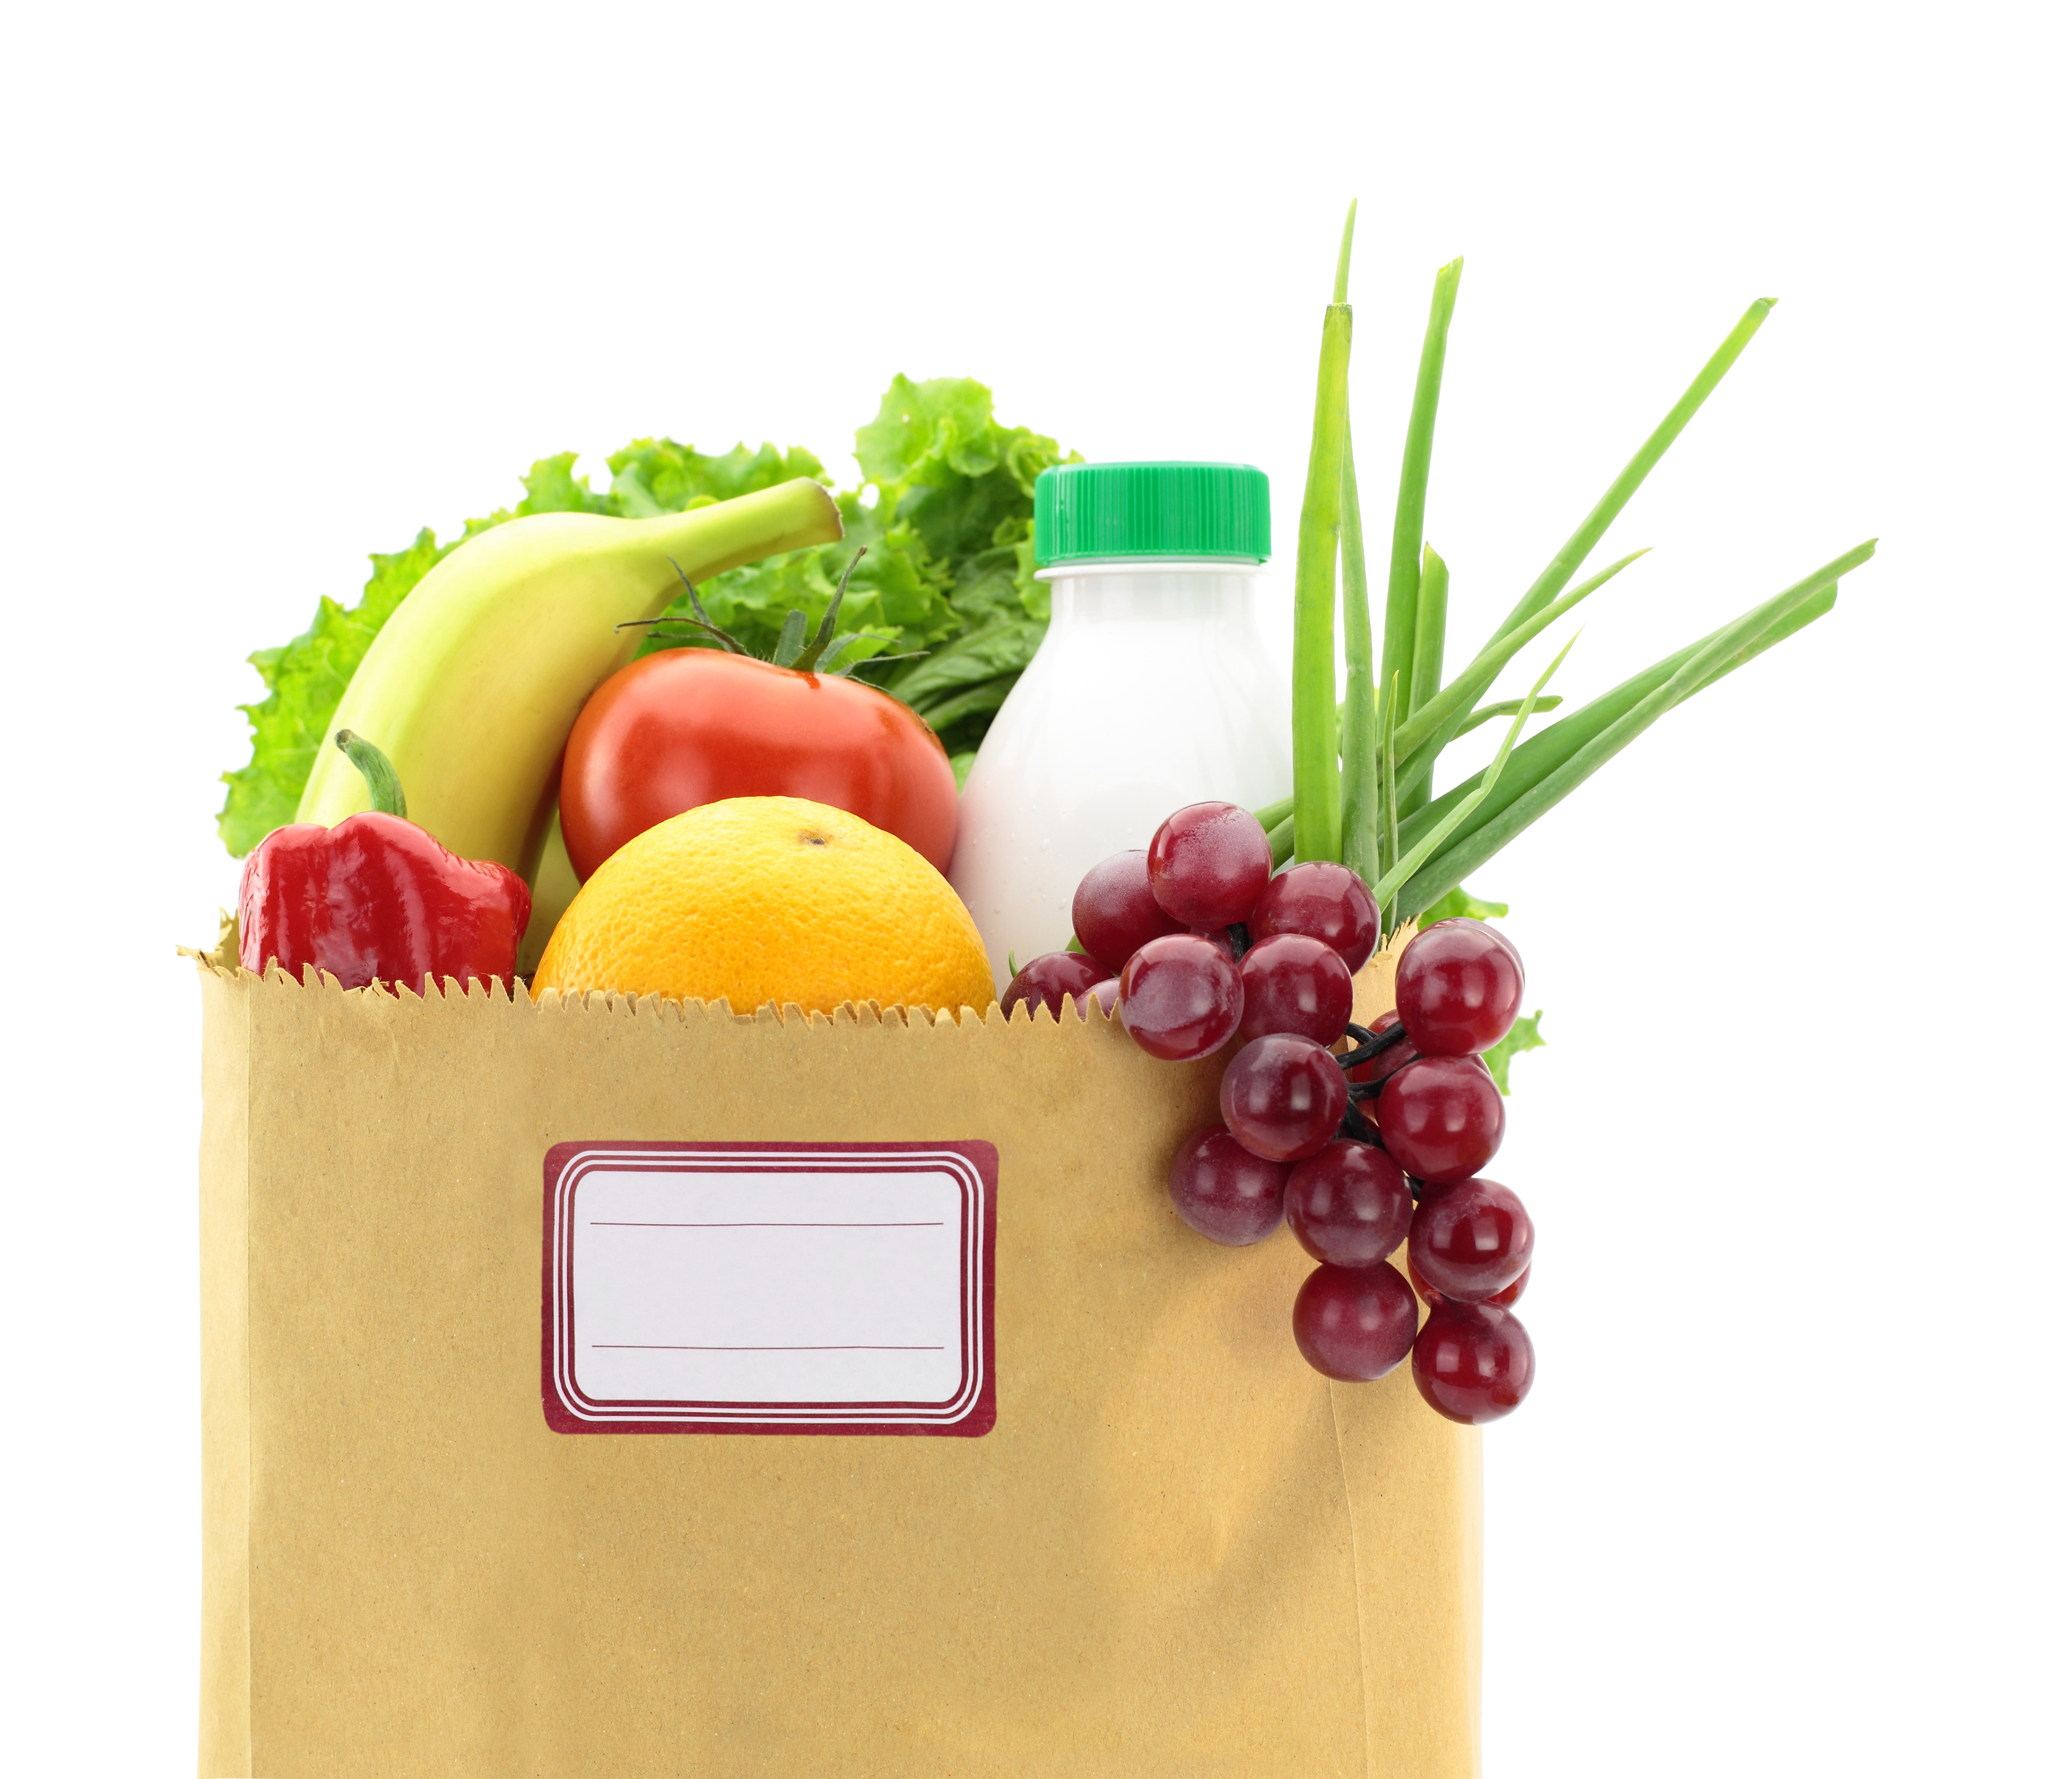 Fresh food in a paper bag with blank label